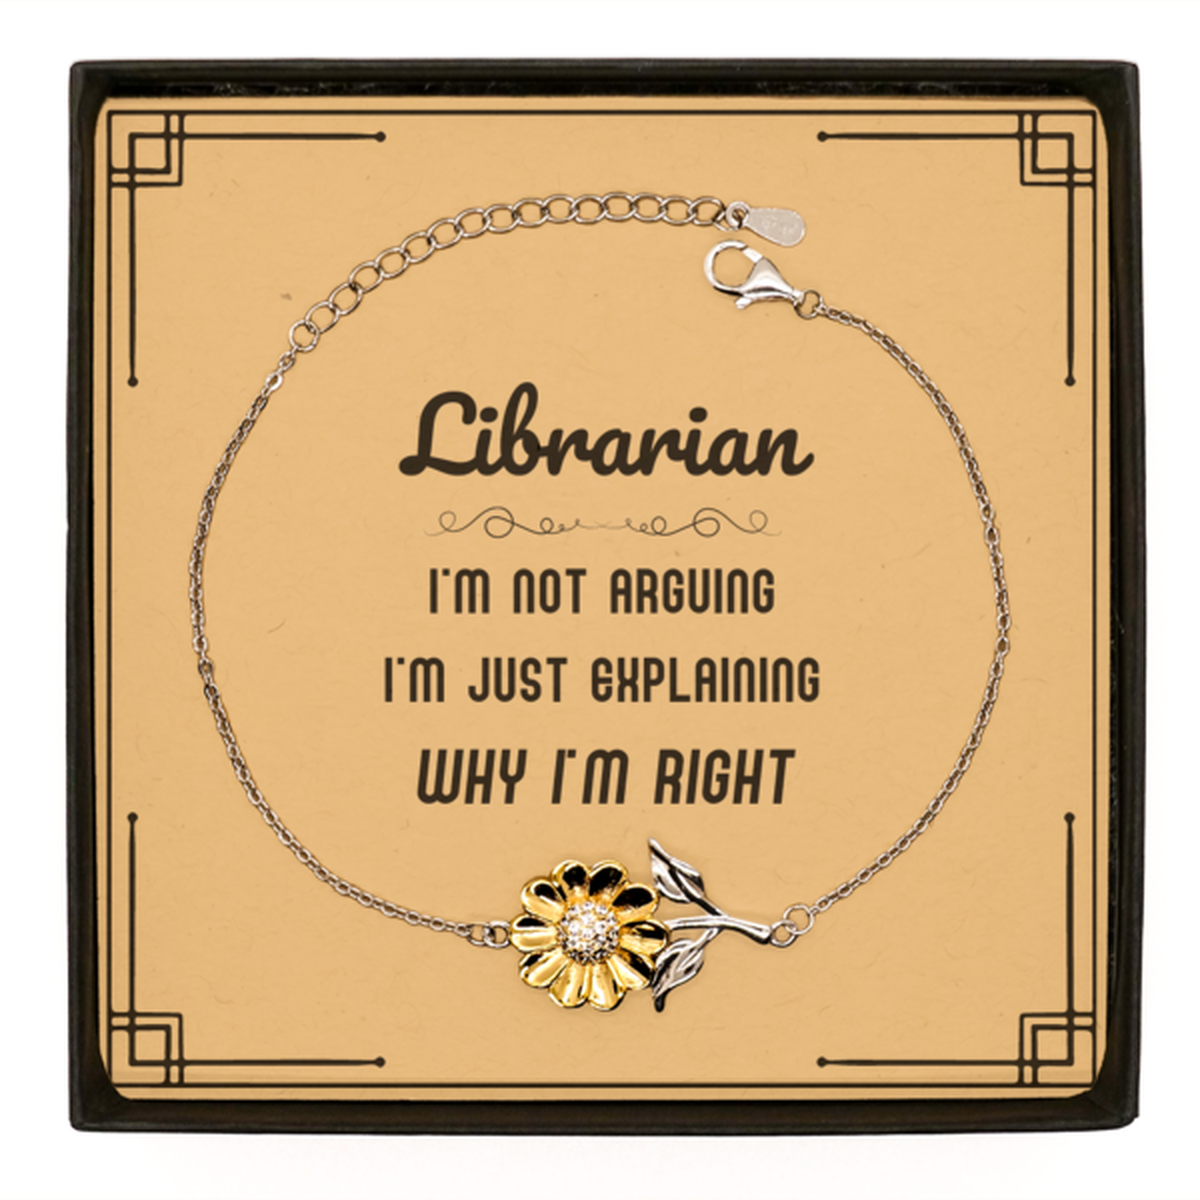 Librarian I'm not Arguing. I'm Just Explaining Why I'm RIGHT Sunflower Bracelet, Funny Saying Quote Librarian Gifts For Librarian Message Card Graduation Birthday Christmas Gifts for Men Women Coworker